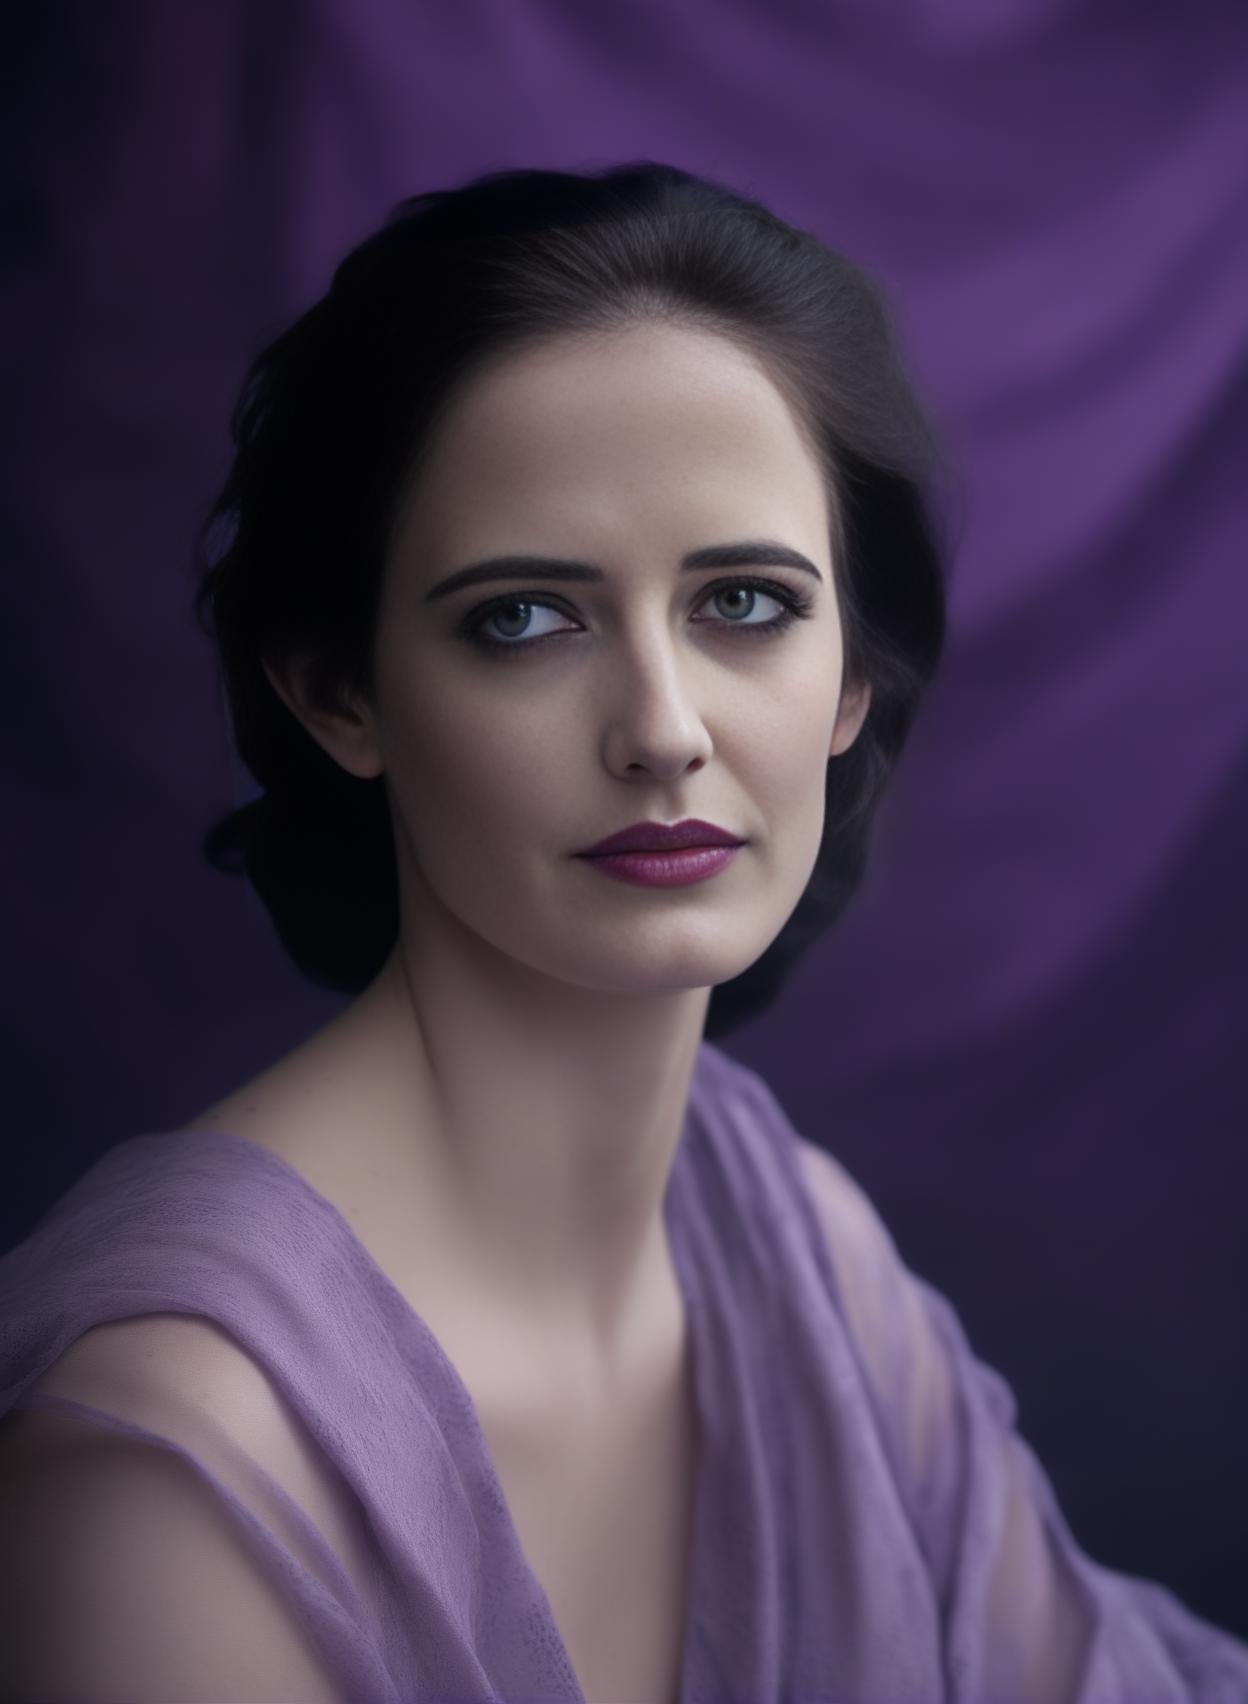 EvaGreen, art by David Palumbo, photograph, Contemplative Palestinian Female, Imām, studio lighting, Phase One XF IQ4 150MP, 80mm, Alabaster and Violet hue, most beautiful artwork in the world,  <lora:EvaGreenSDXL:1>